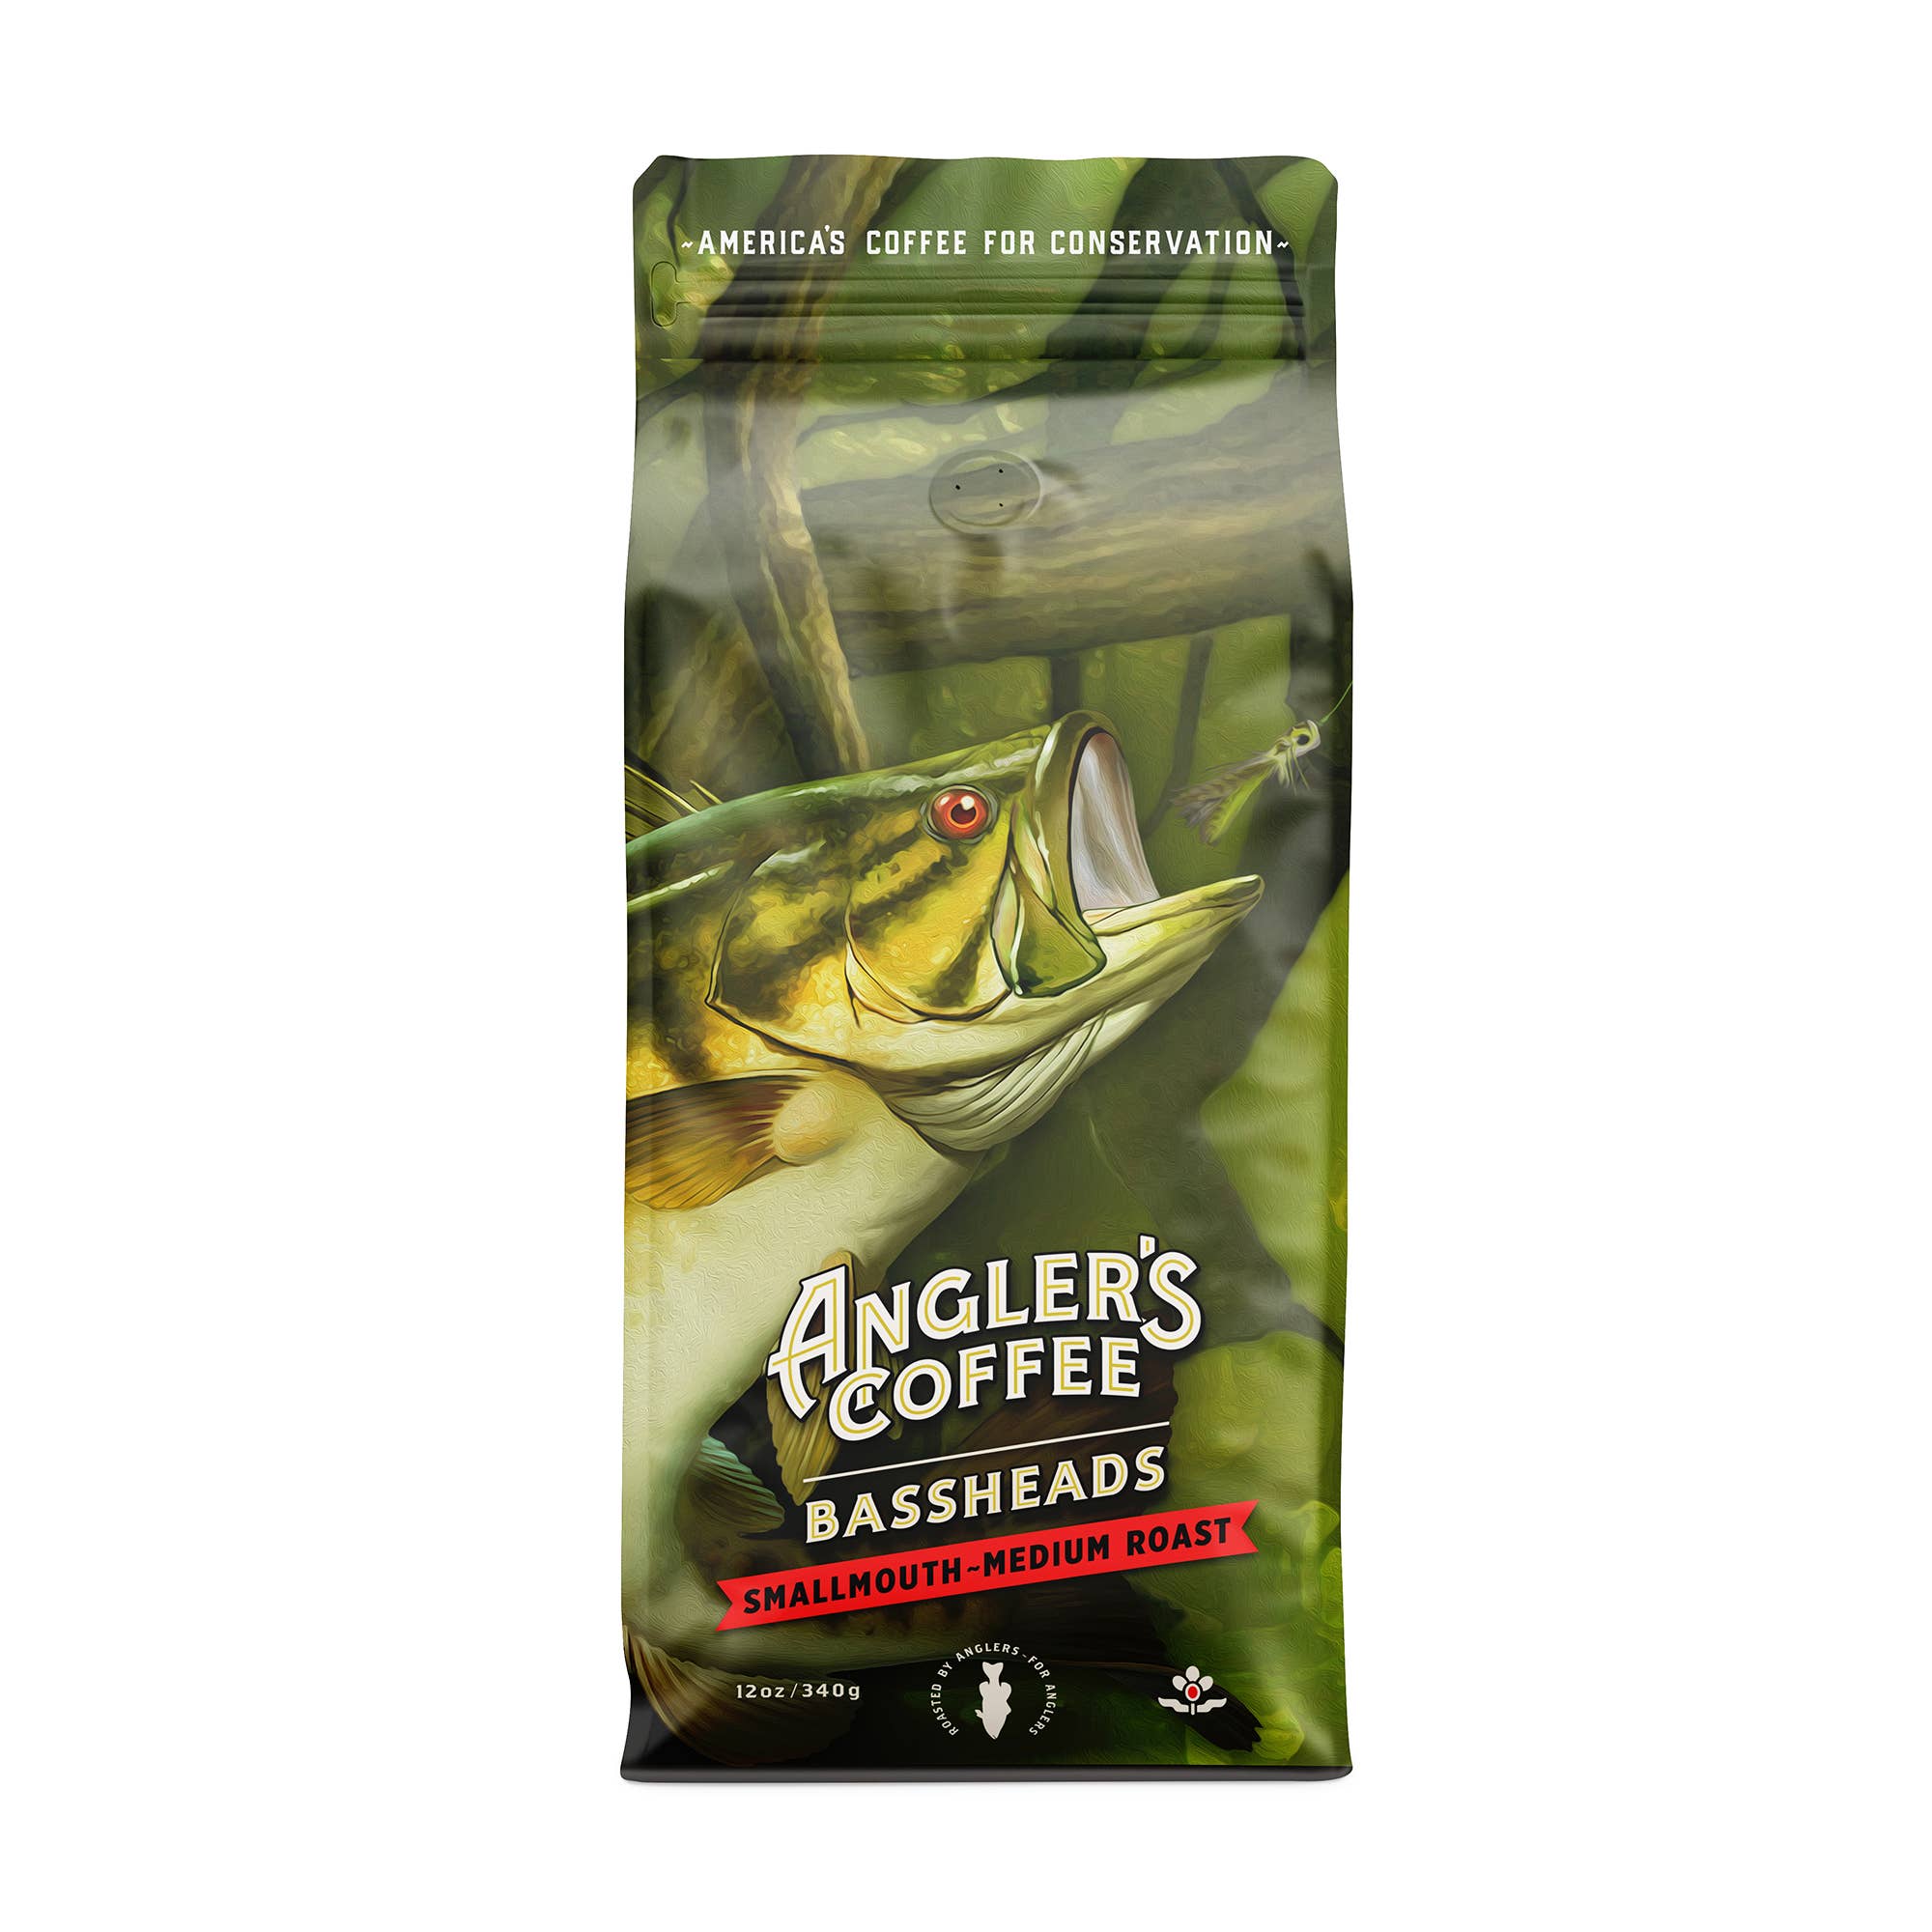 Angler's Coffee - Bassheads Smallmouth Blend - Single Unit: 12oz / Drip Grind - Pacific Flyway Supplies